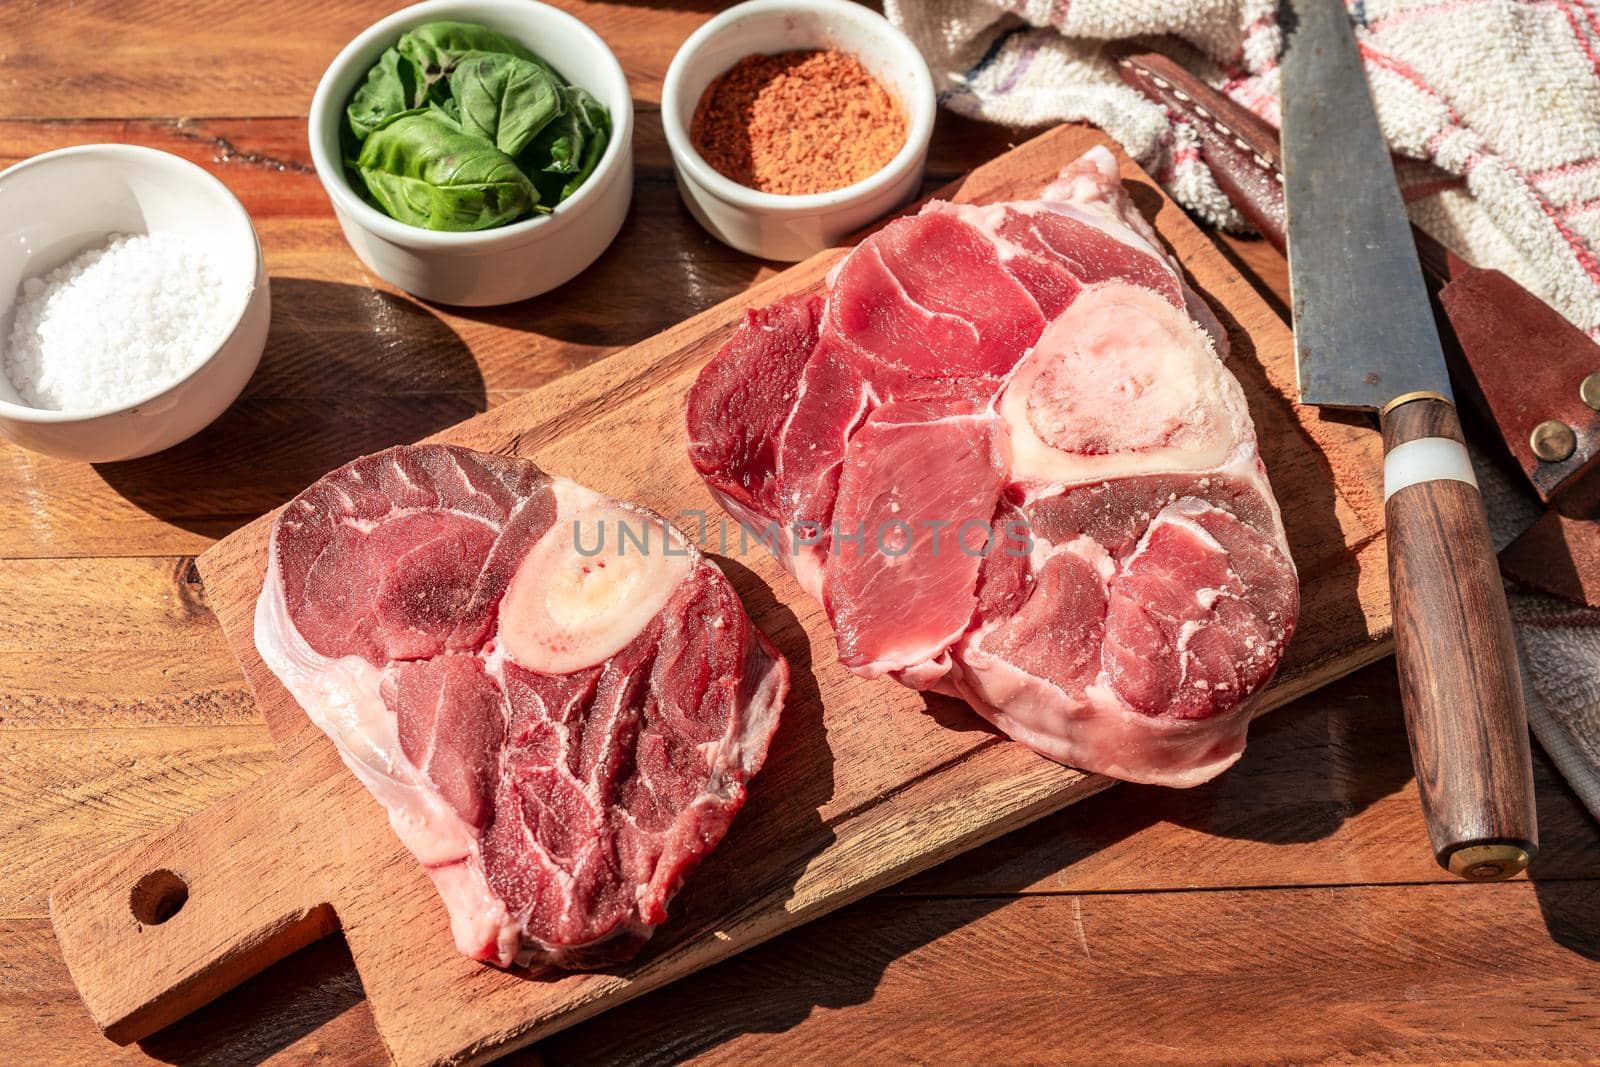 Two steaks of raw beef ossobuco on a wooden board with seasoning to flavour the pieces of meat. Animal protein concept, cheap cuts of beef. Aereal view.